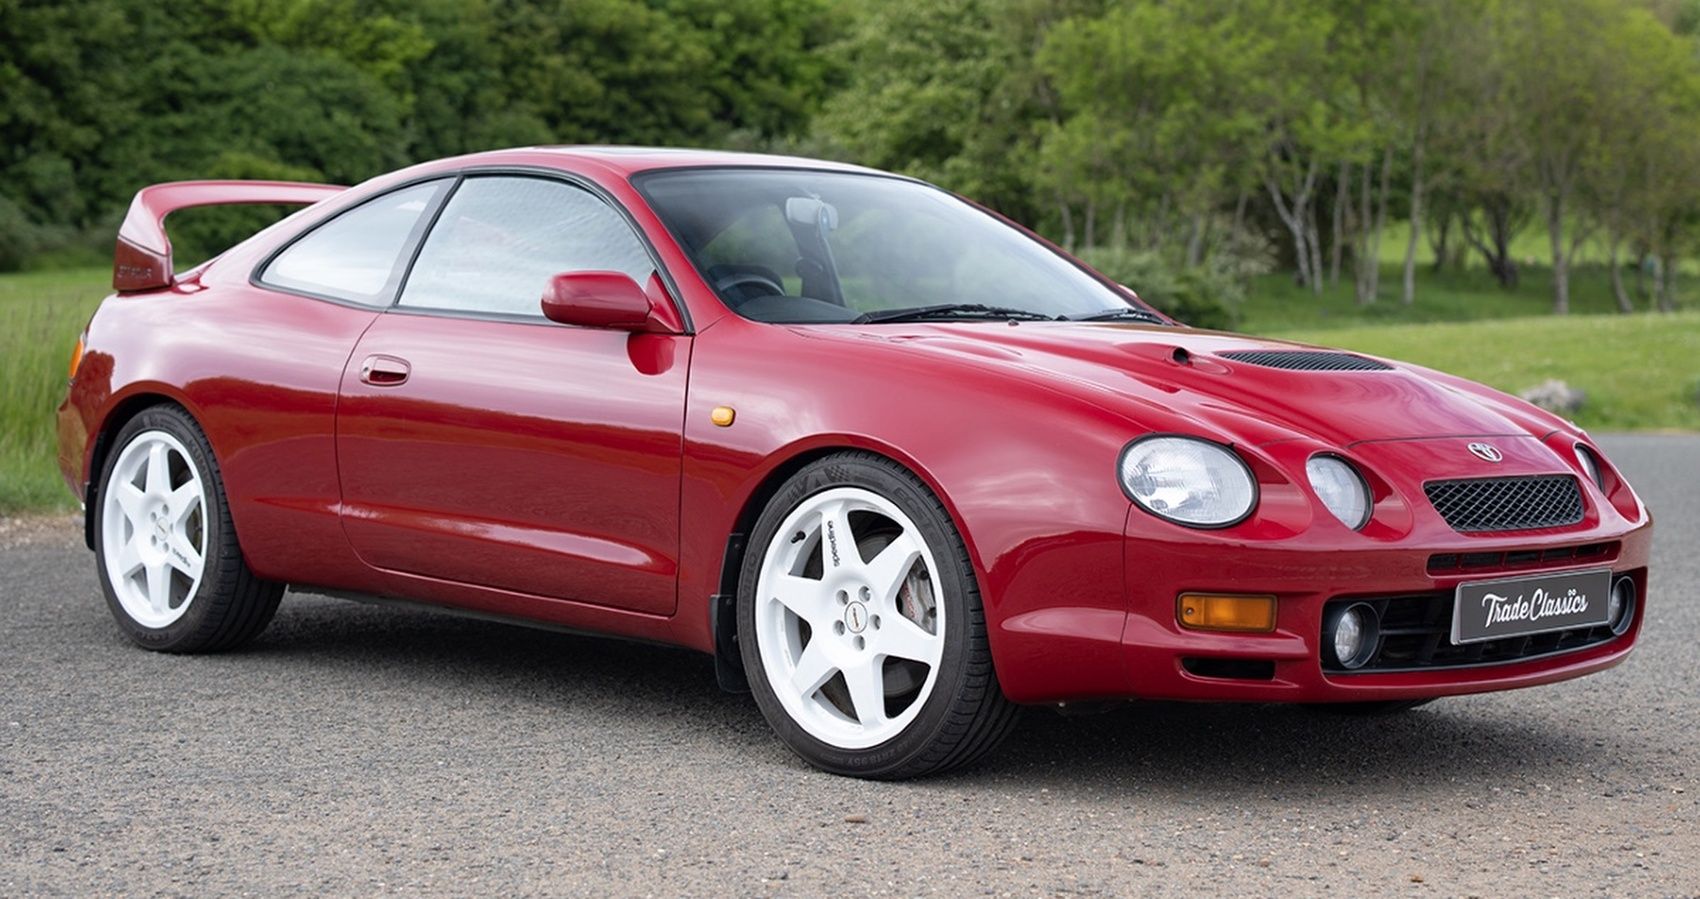 1995 Toyota Celica GT4 ST205 FEATURED IMAGE Cropped